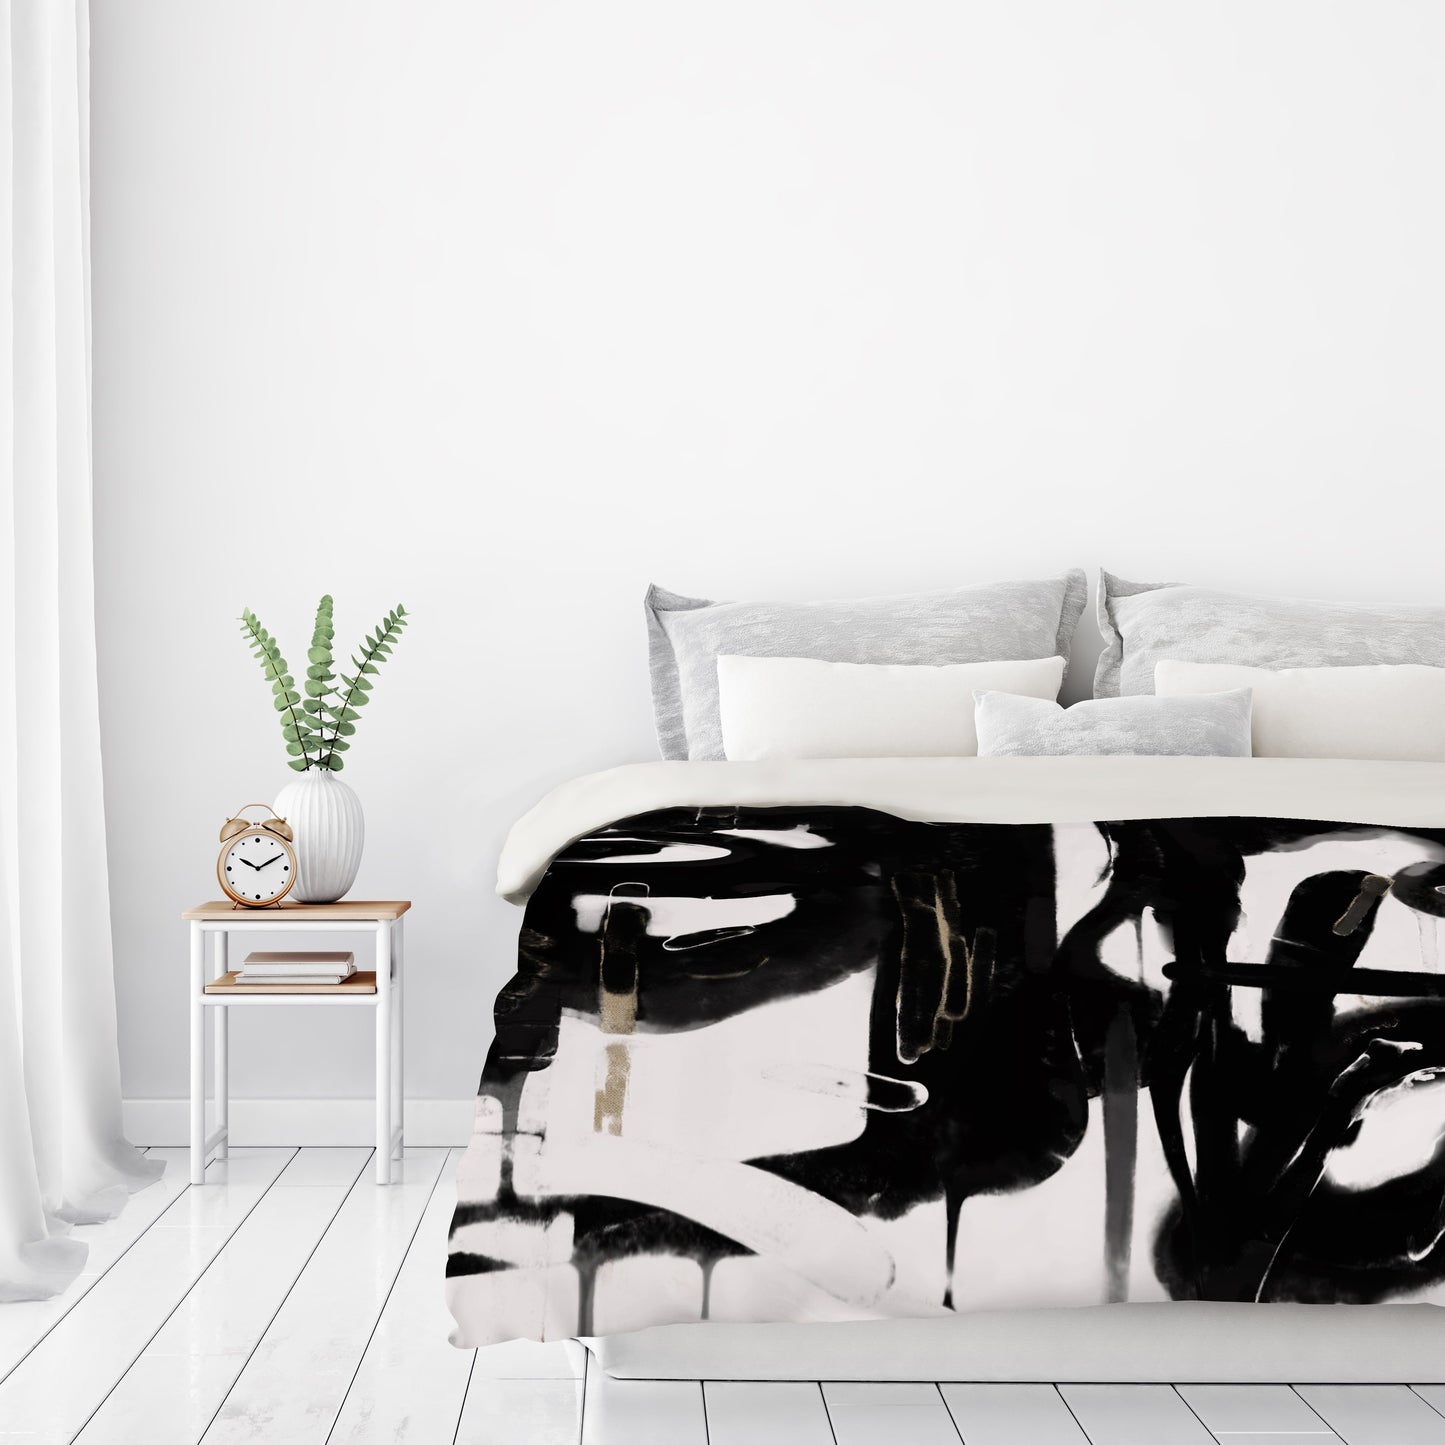 Black And White Abstract 5 by Kasi Minami Duvet Cover - Americanflat